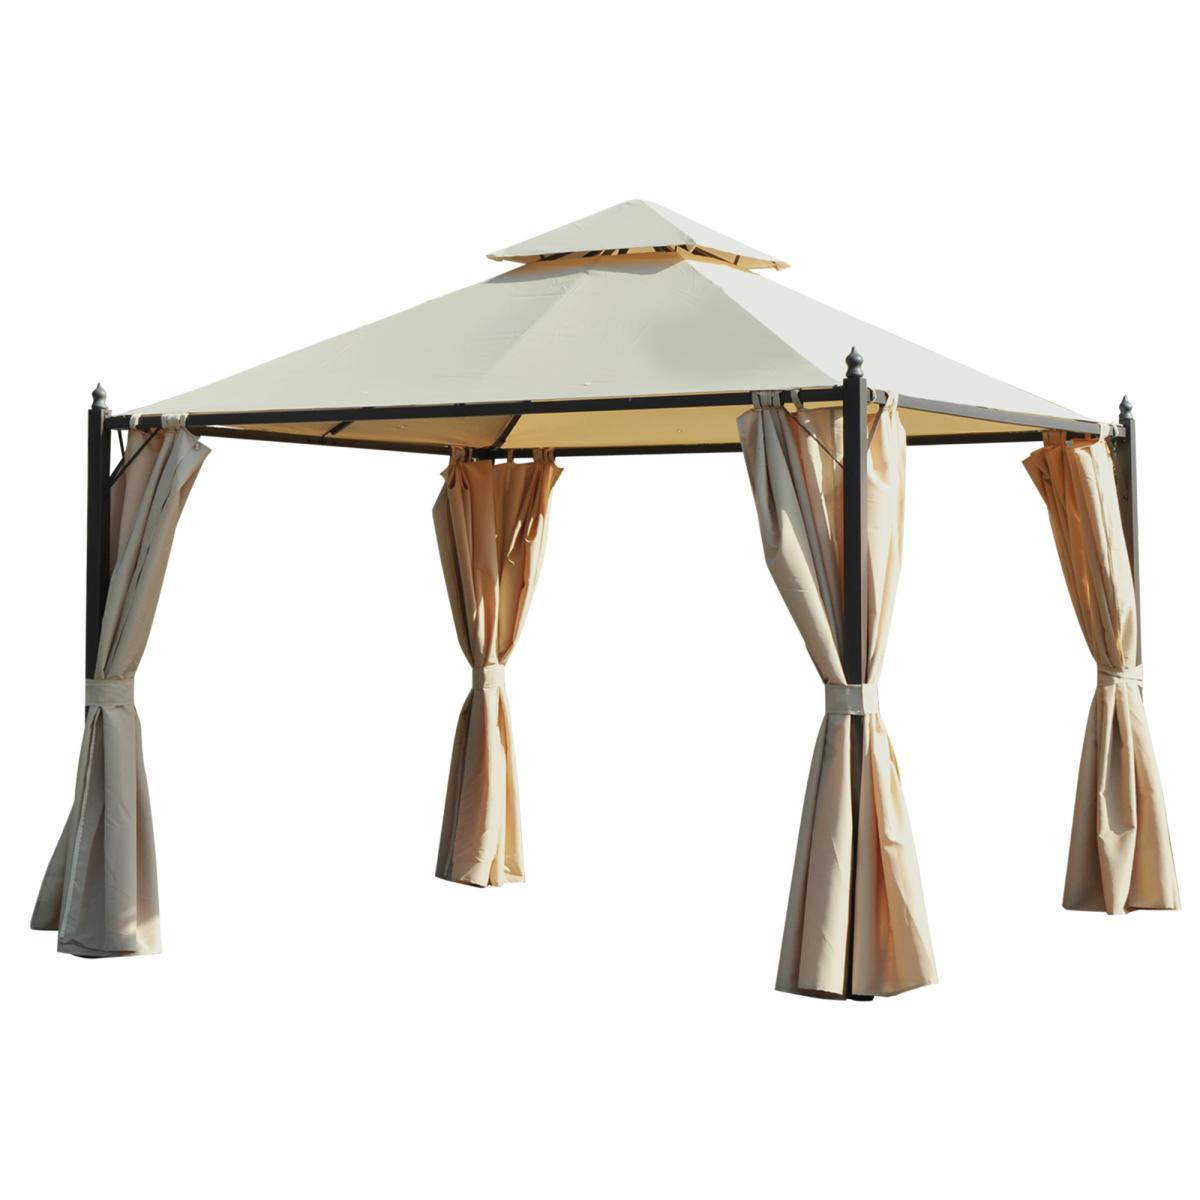 10' x 10' Steel Outdoor Patio Gazebo with Polyester Privacy Curtains, Two-Tier Roof for Air, & Large Design